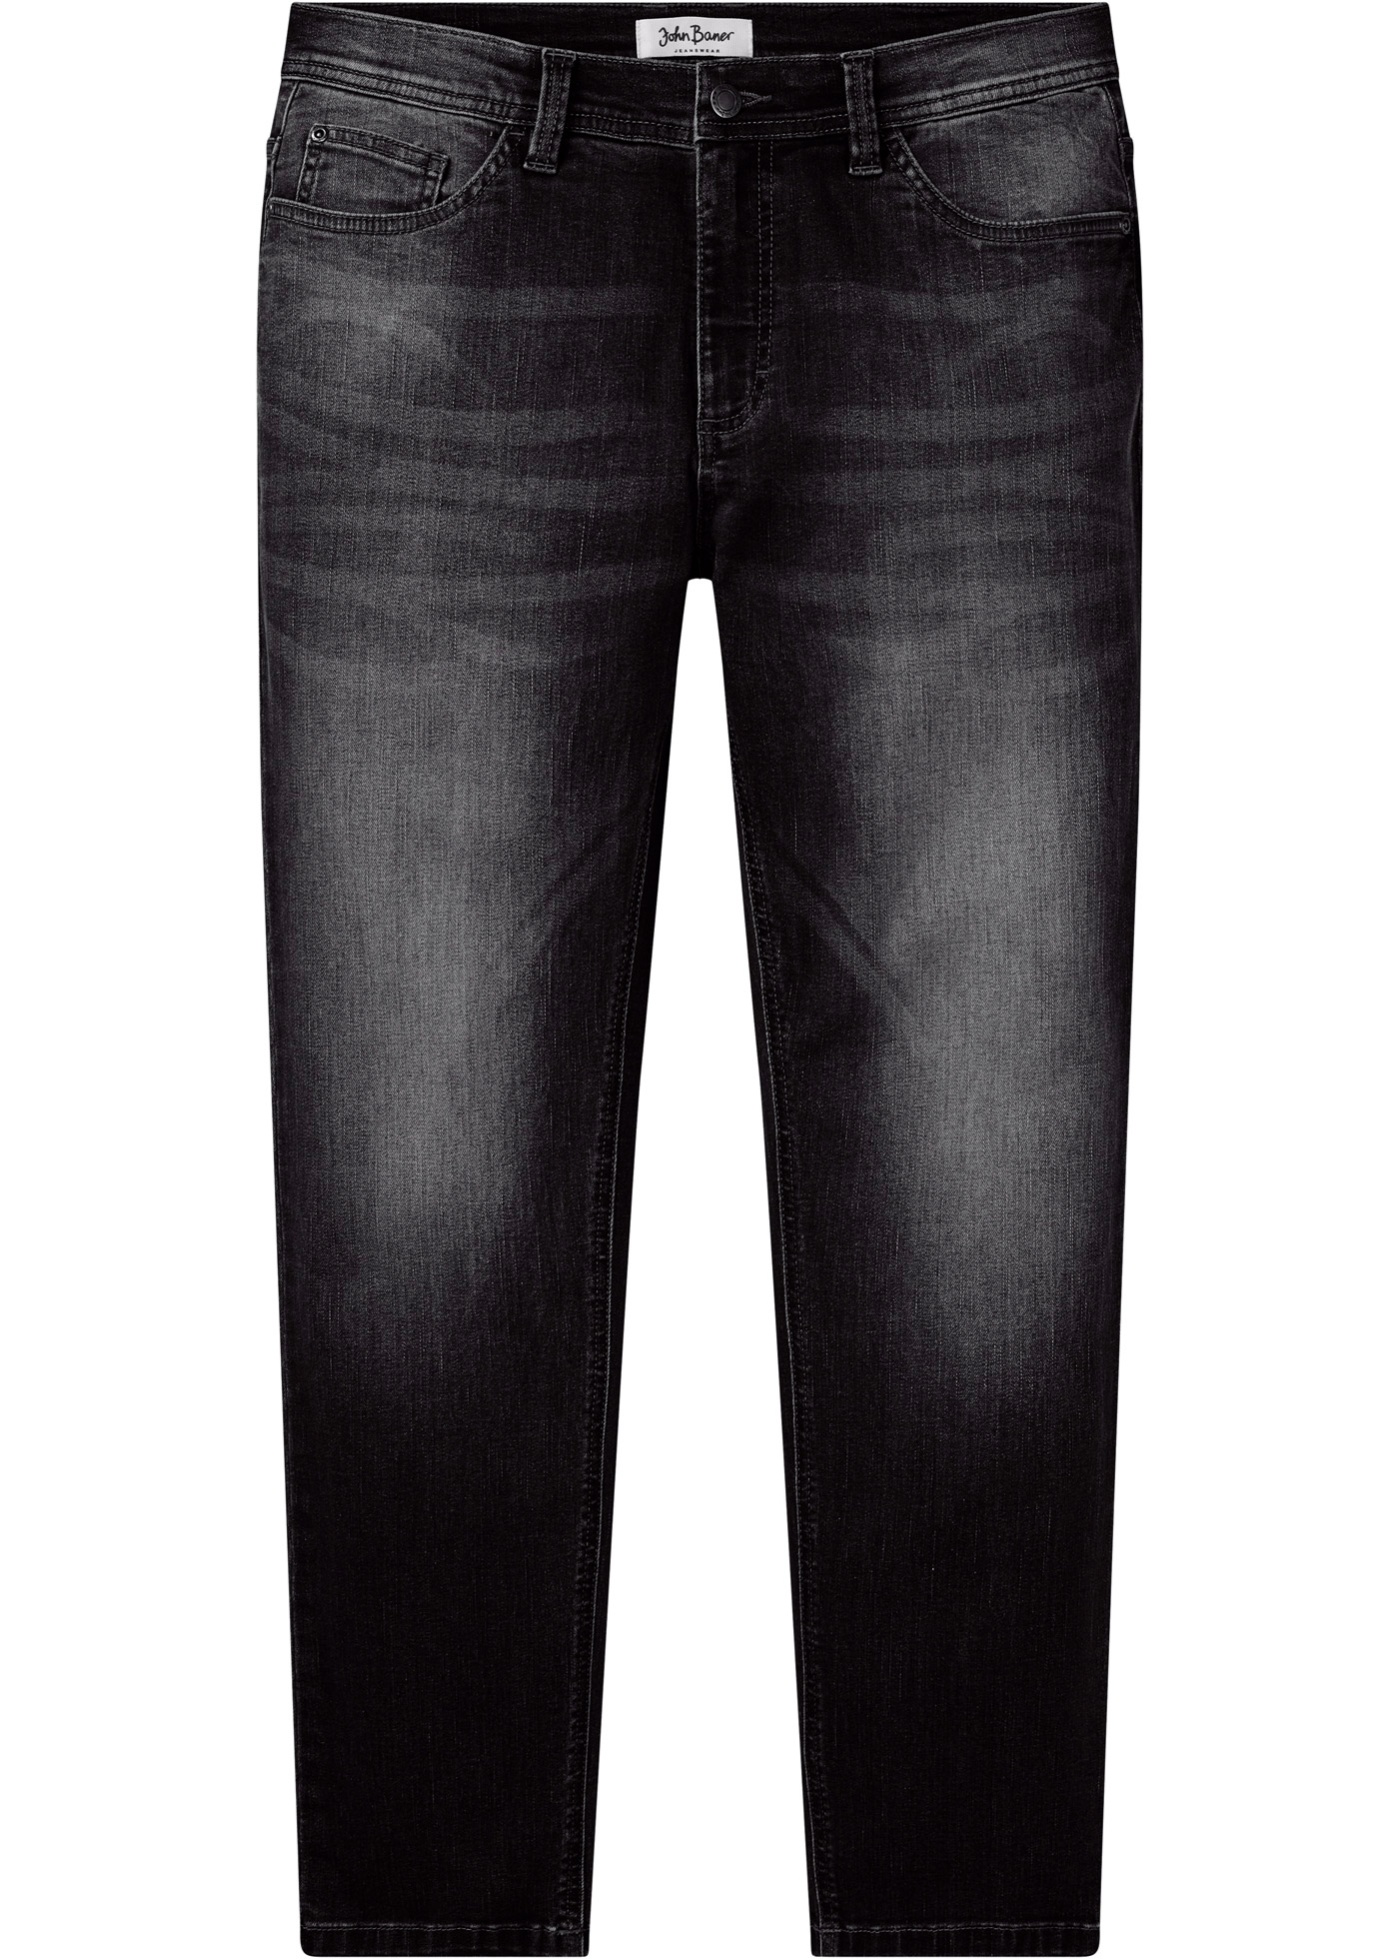 jean extensible regular fit, tapered